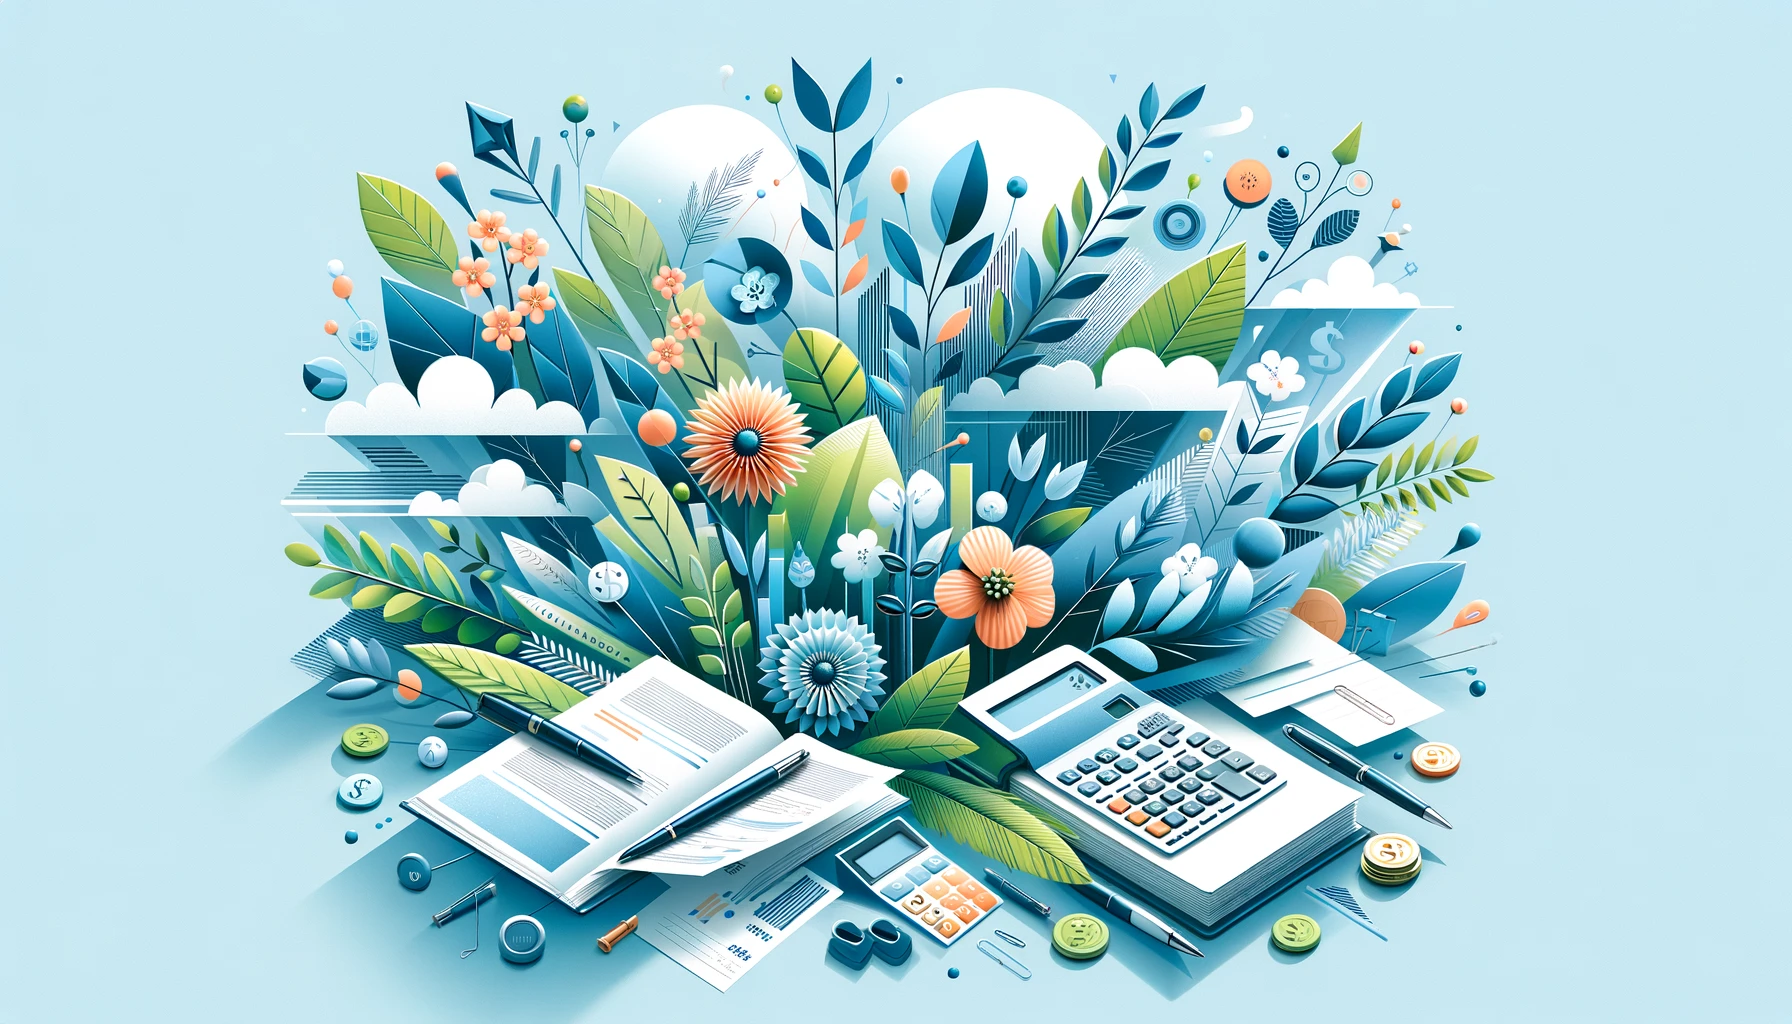 financial records and tools are nestled among a spring floral display in orange, blue, and green